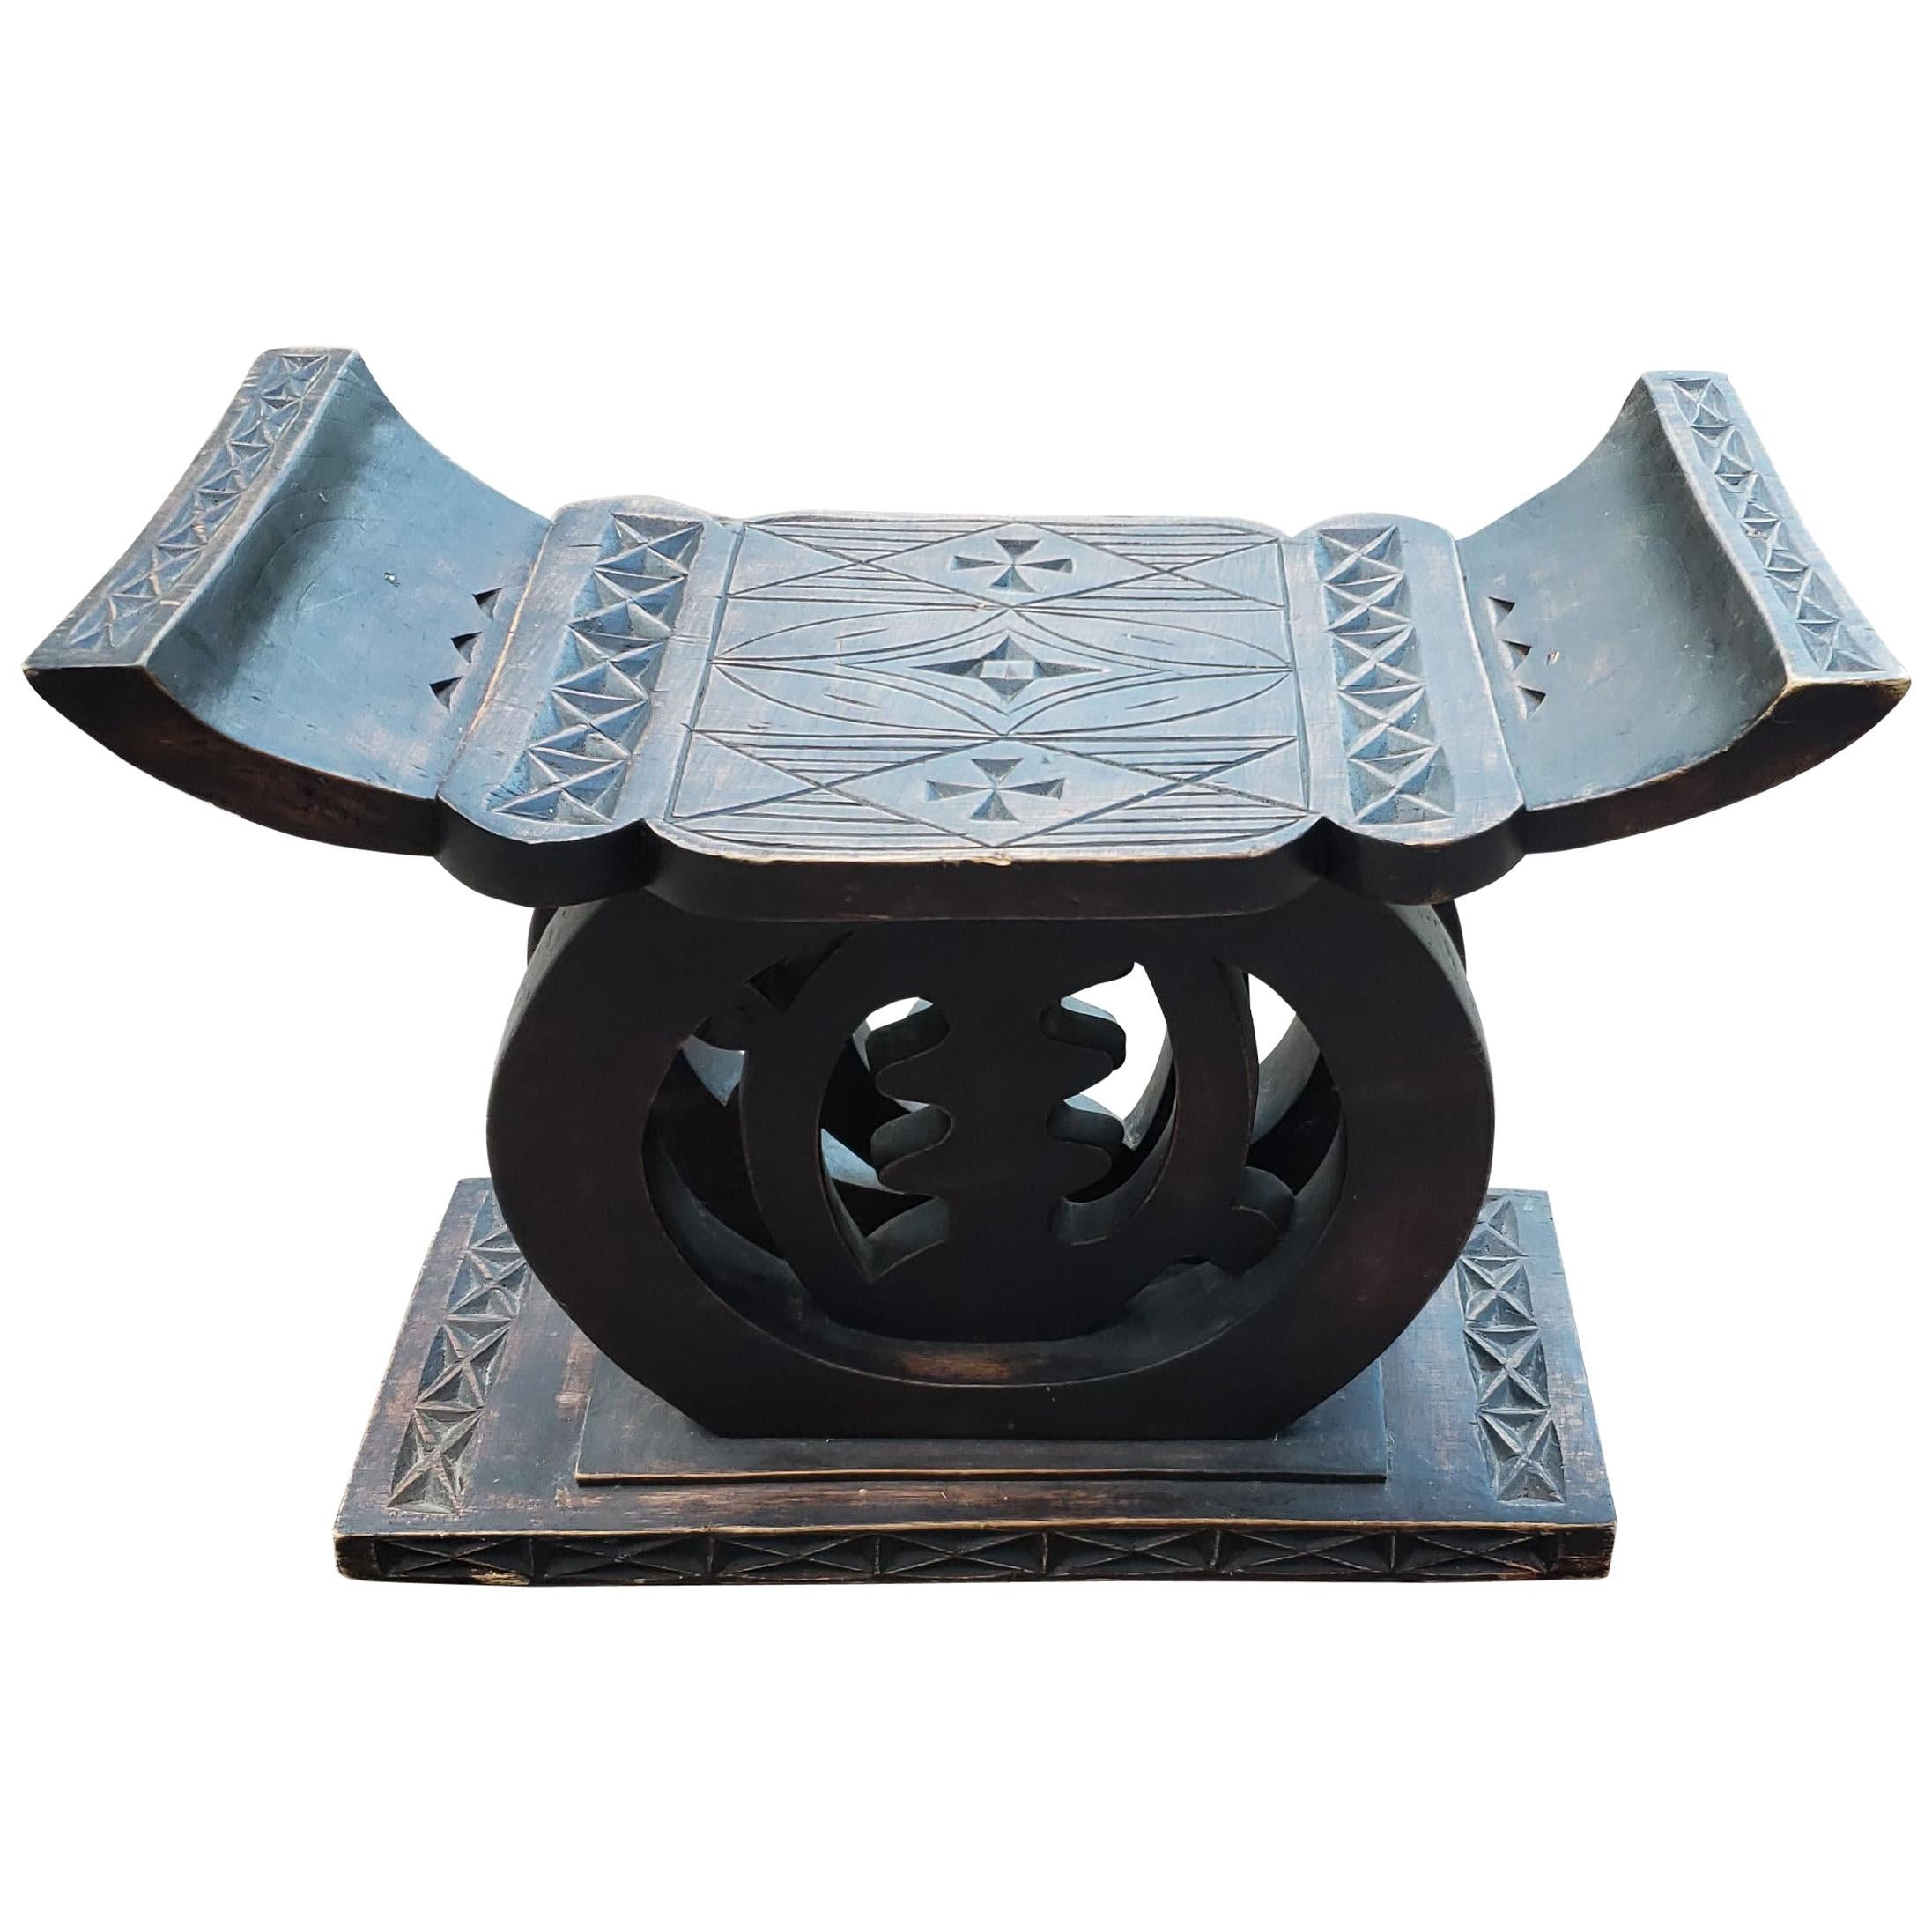 Asian Chinese Handmade Wooden Stool For Sale